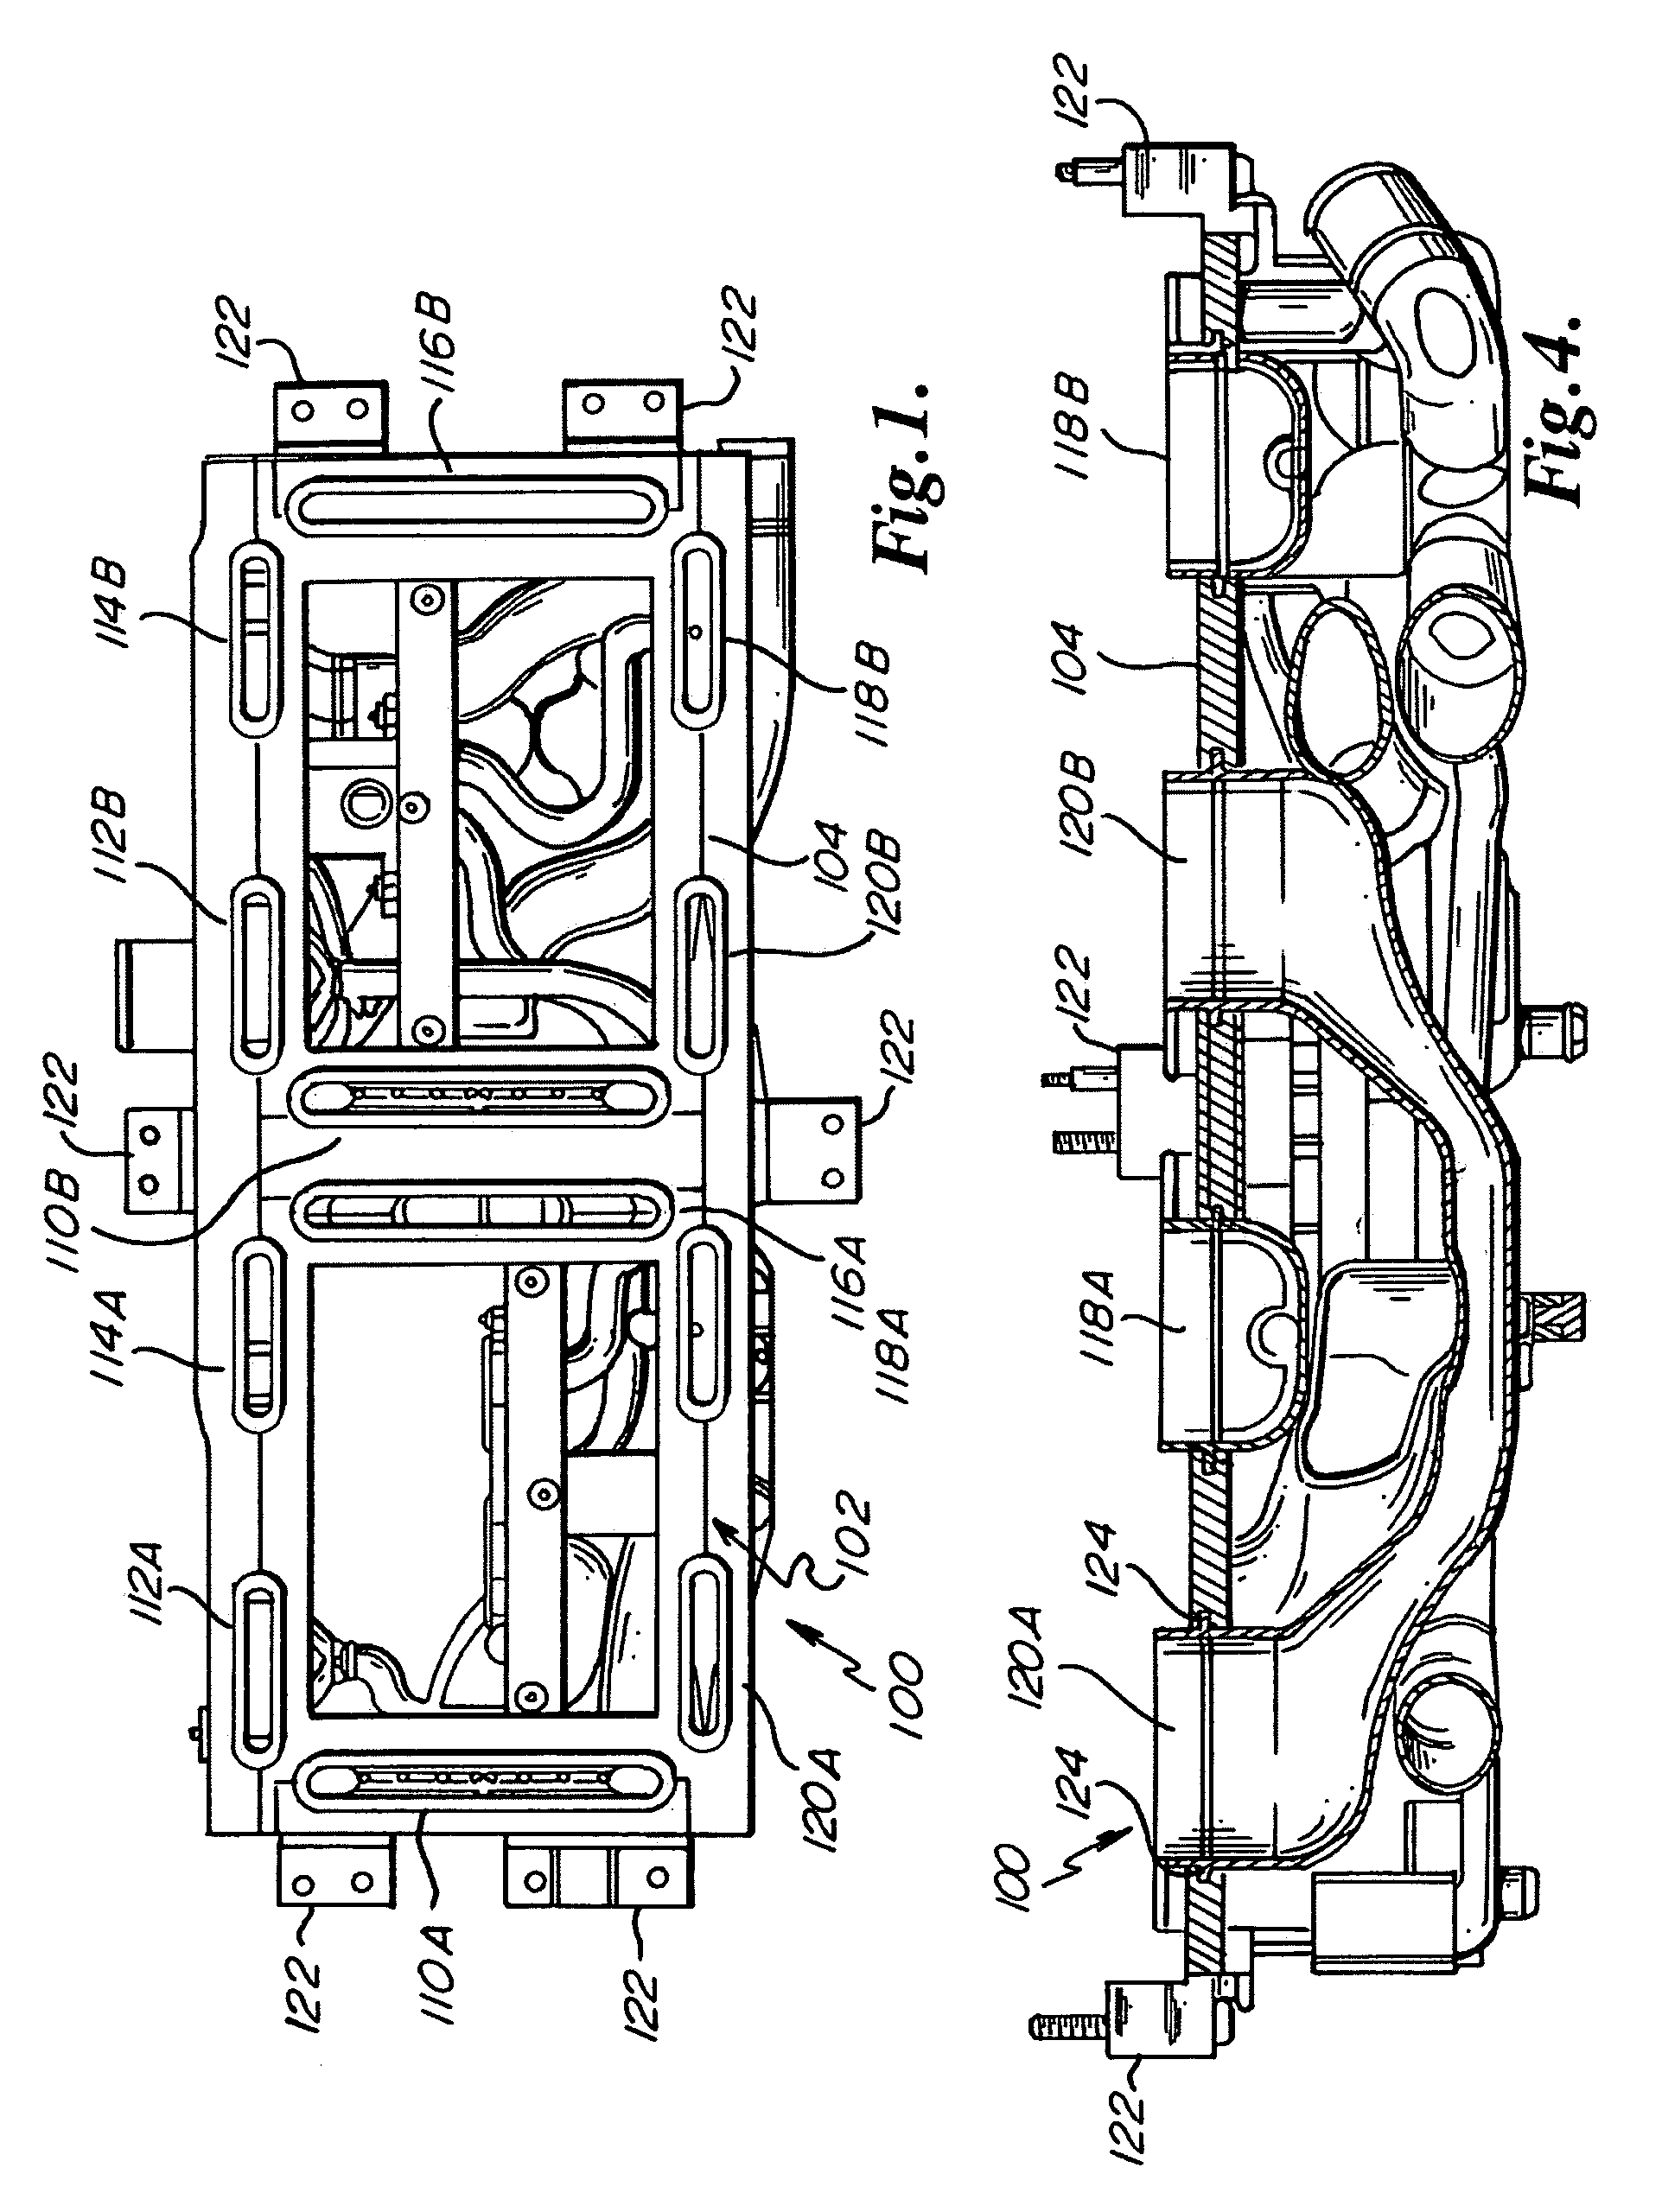 Fuel cell manifold